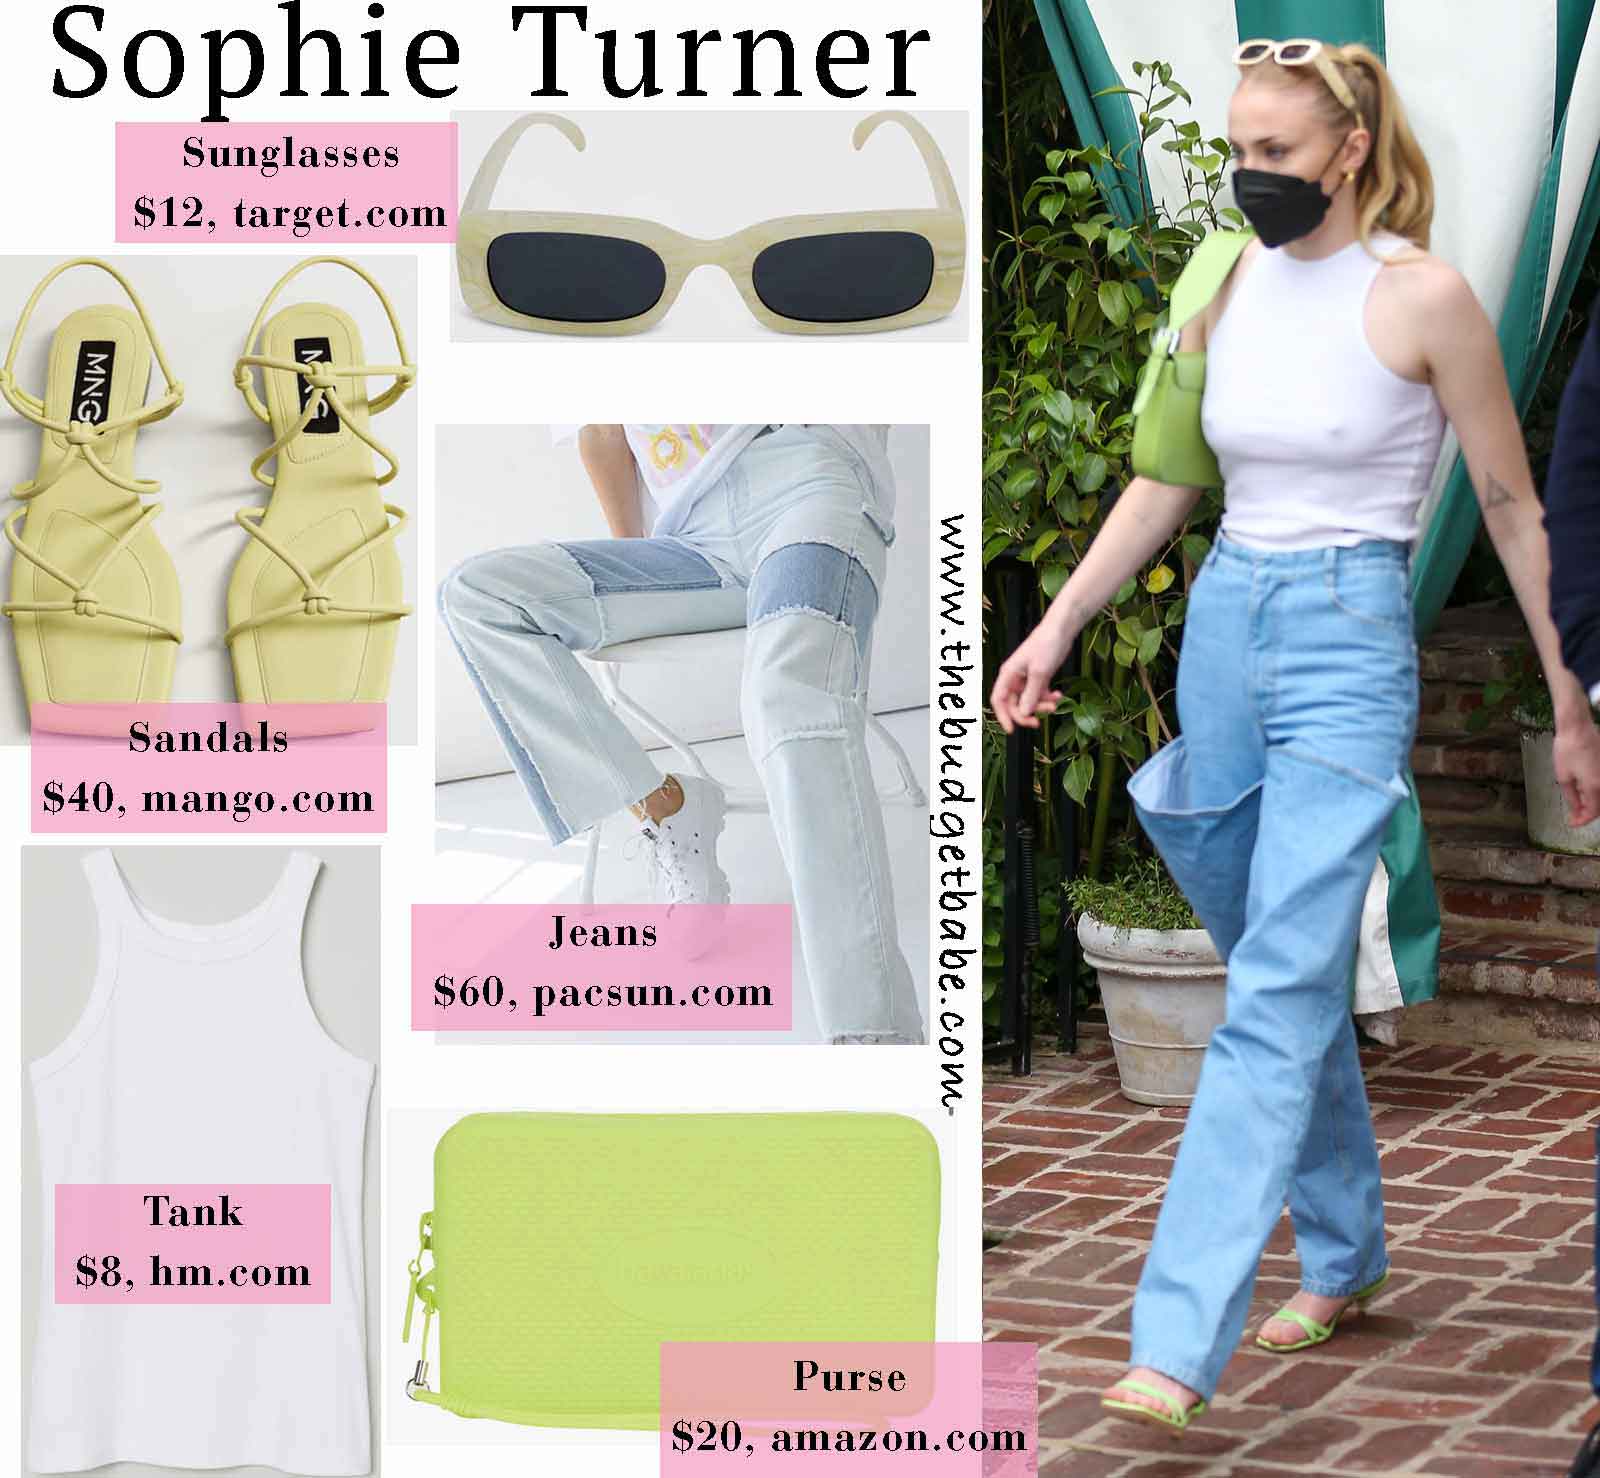 Sophie Turner's KSENIASCHNAIDER Jeans and High-neck Tank Look for Less